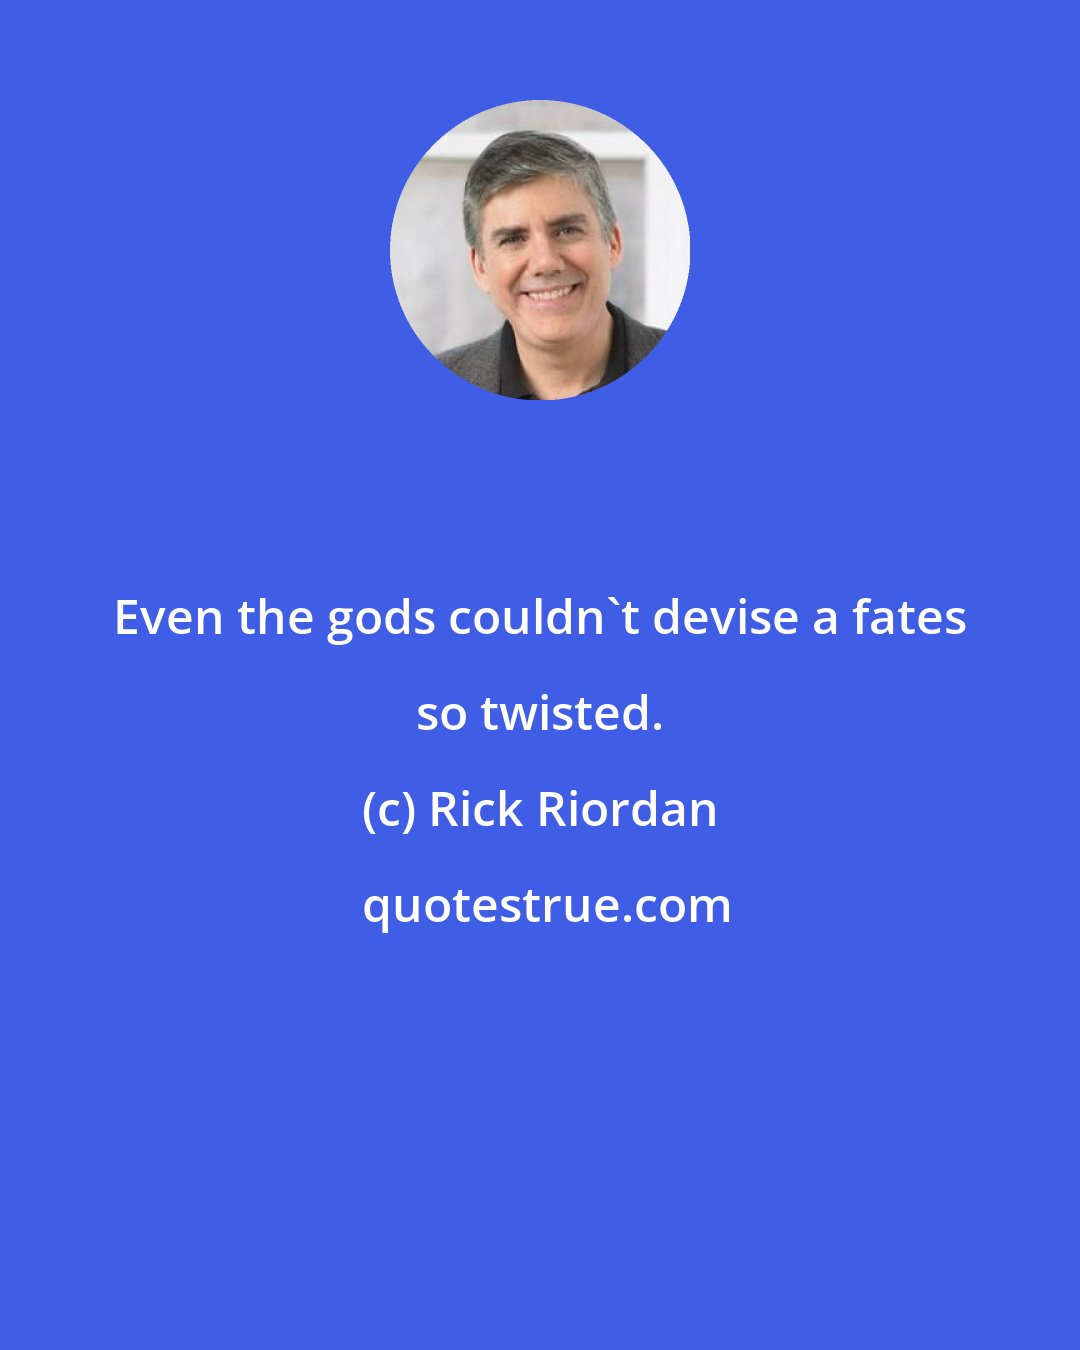 Rick Riordan: Even the gods couldn't devise a fates so twisted.